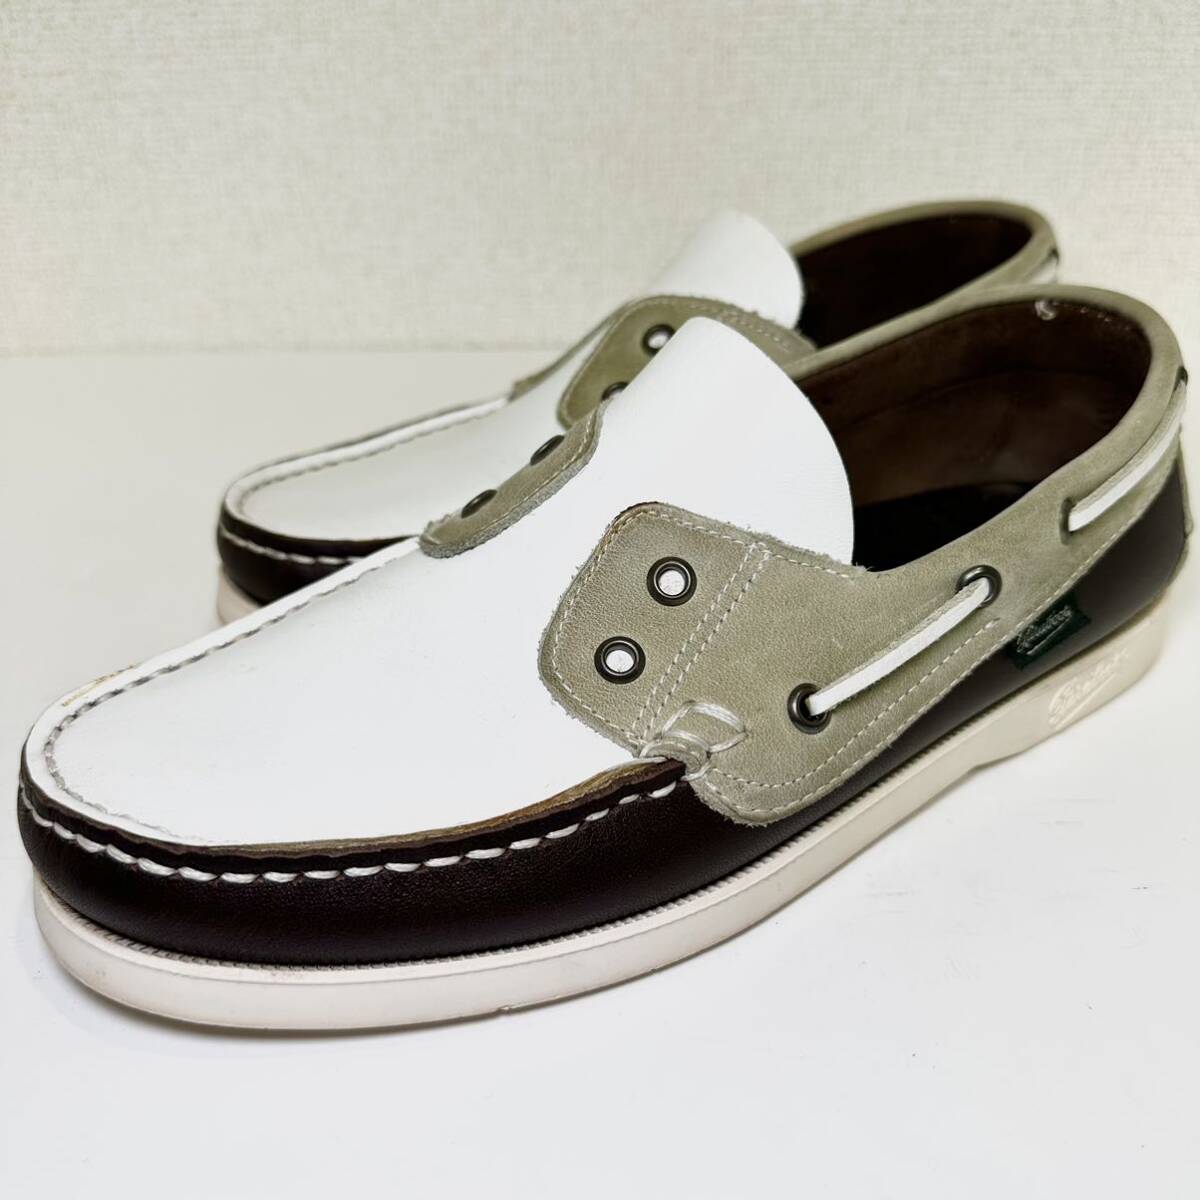  prompt decision /Paraboot BEAMS Paraboot Beams special order deck shoes MARINE moccasin white Brown UK 6.5 25.0 Loafer / slip-on shoes 